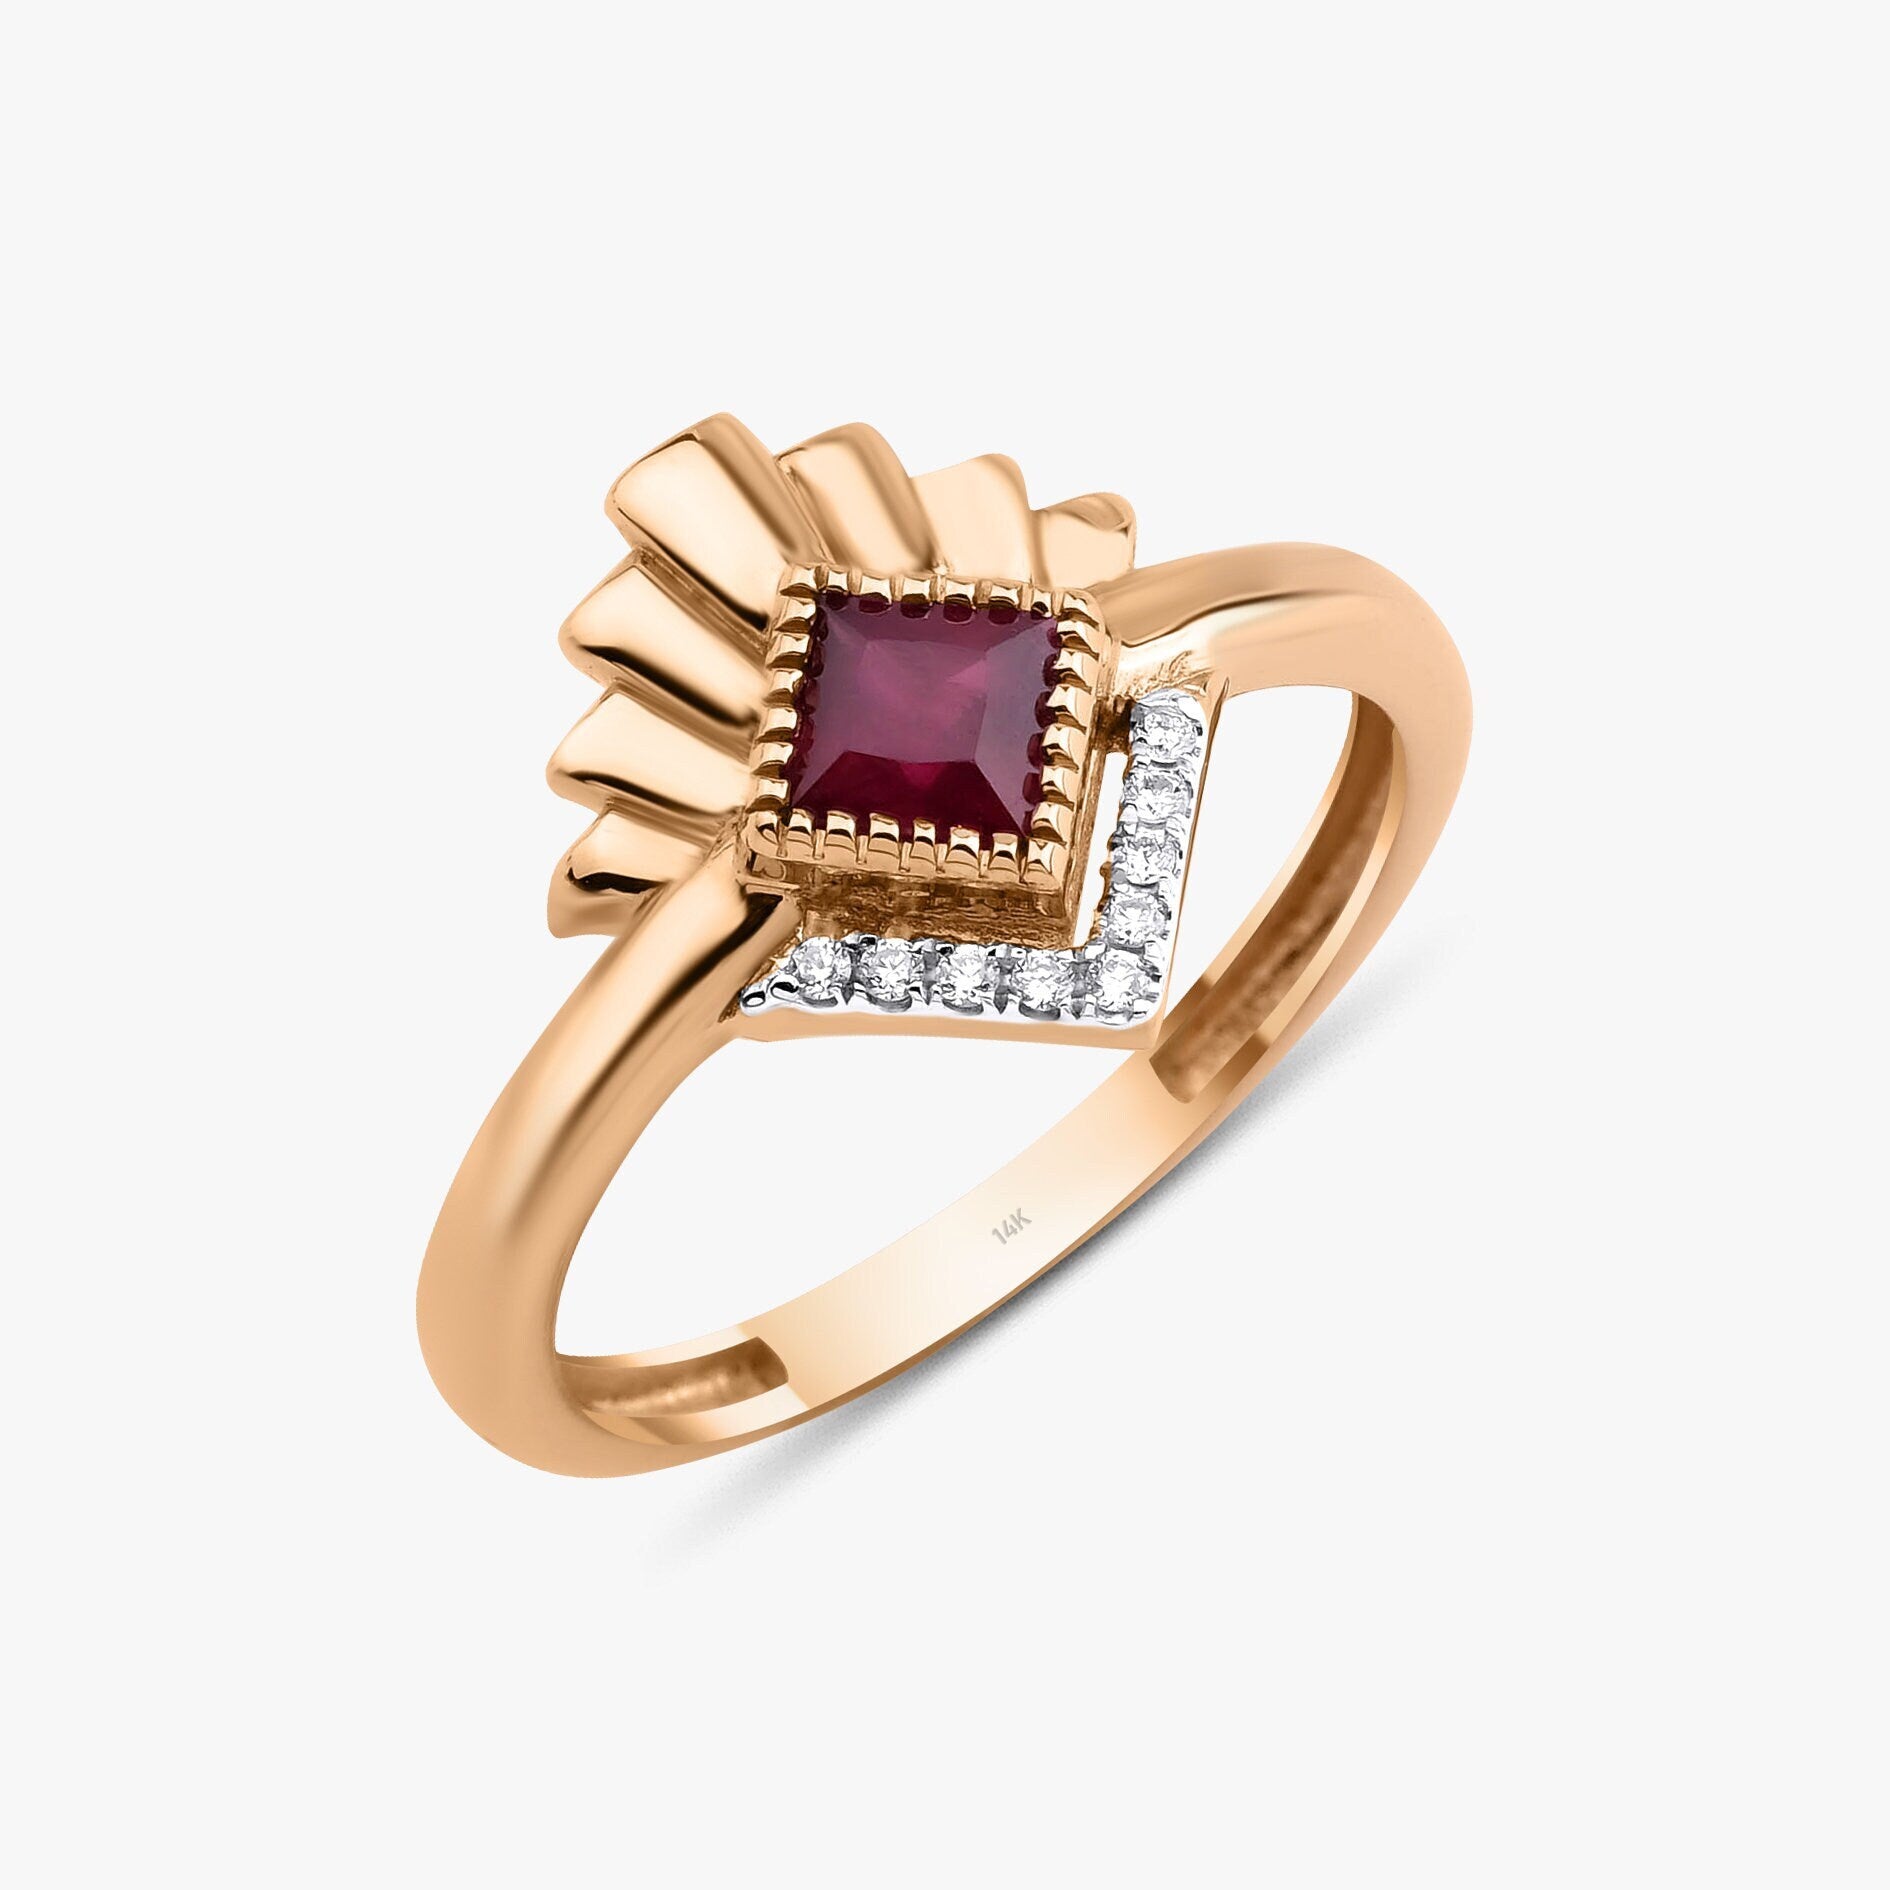 Princess Cut Ruby and Diamond Ring in 14K Gold